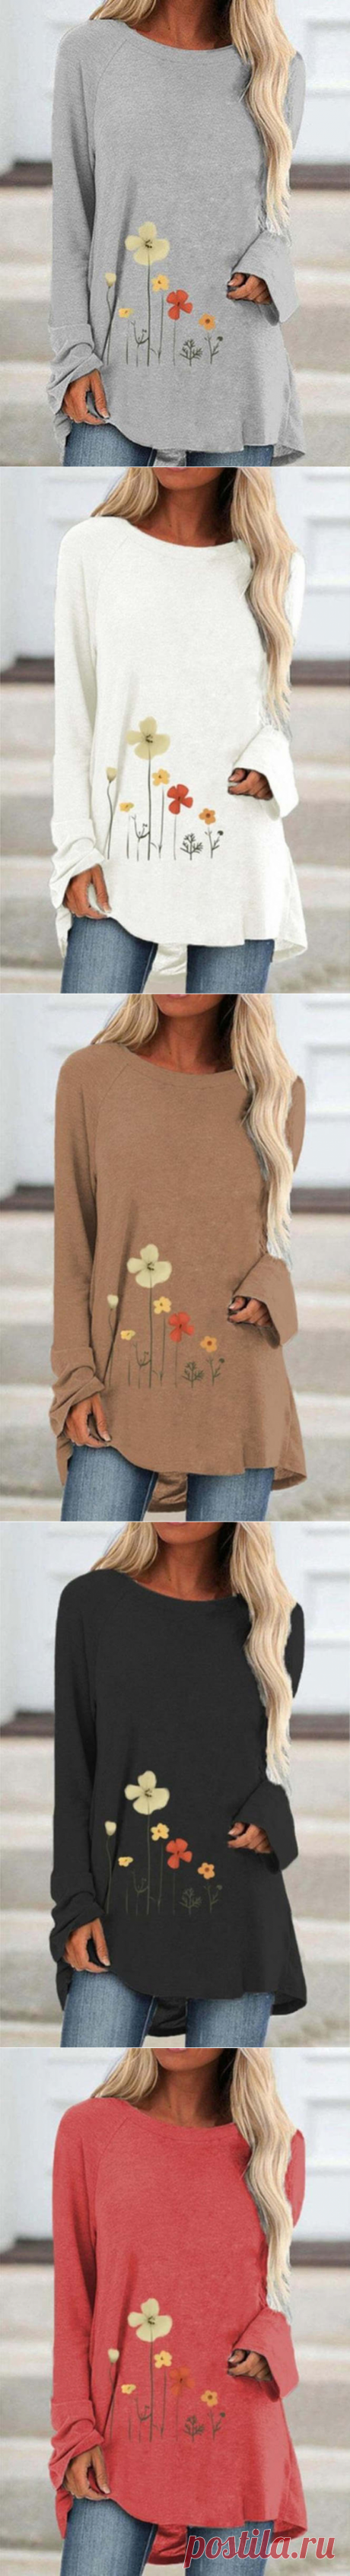 $ 19.96 - women's printed loose round neck floral T-shirt tops - www.clothingi.com